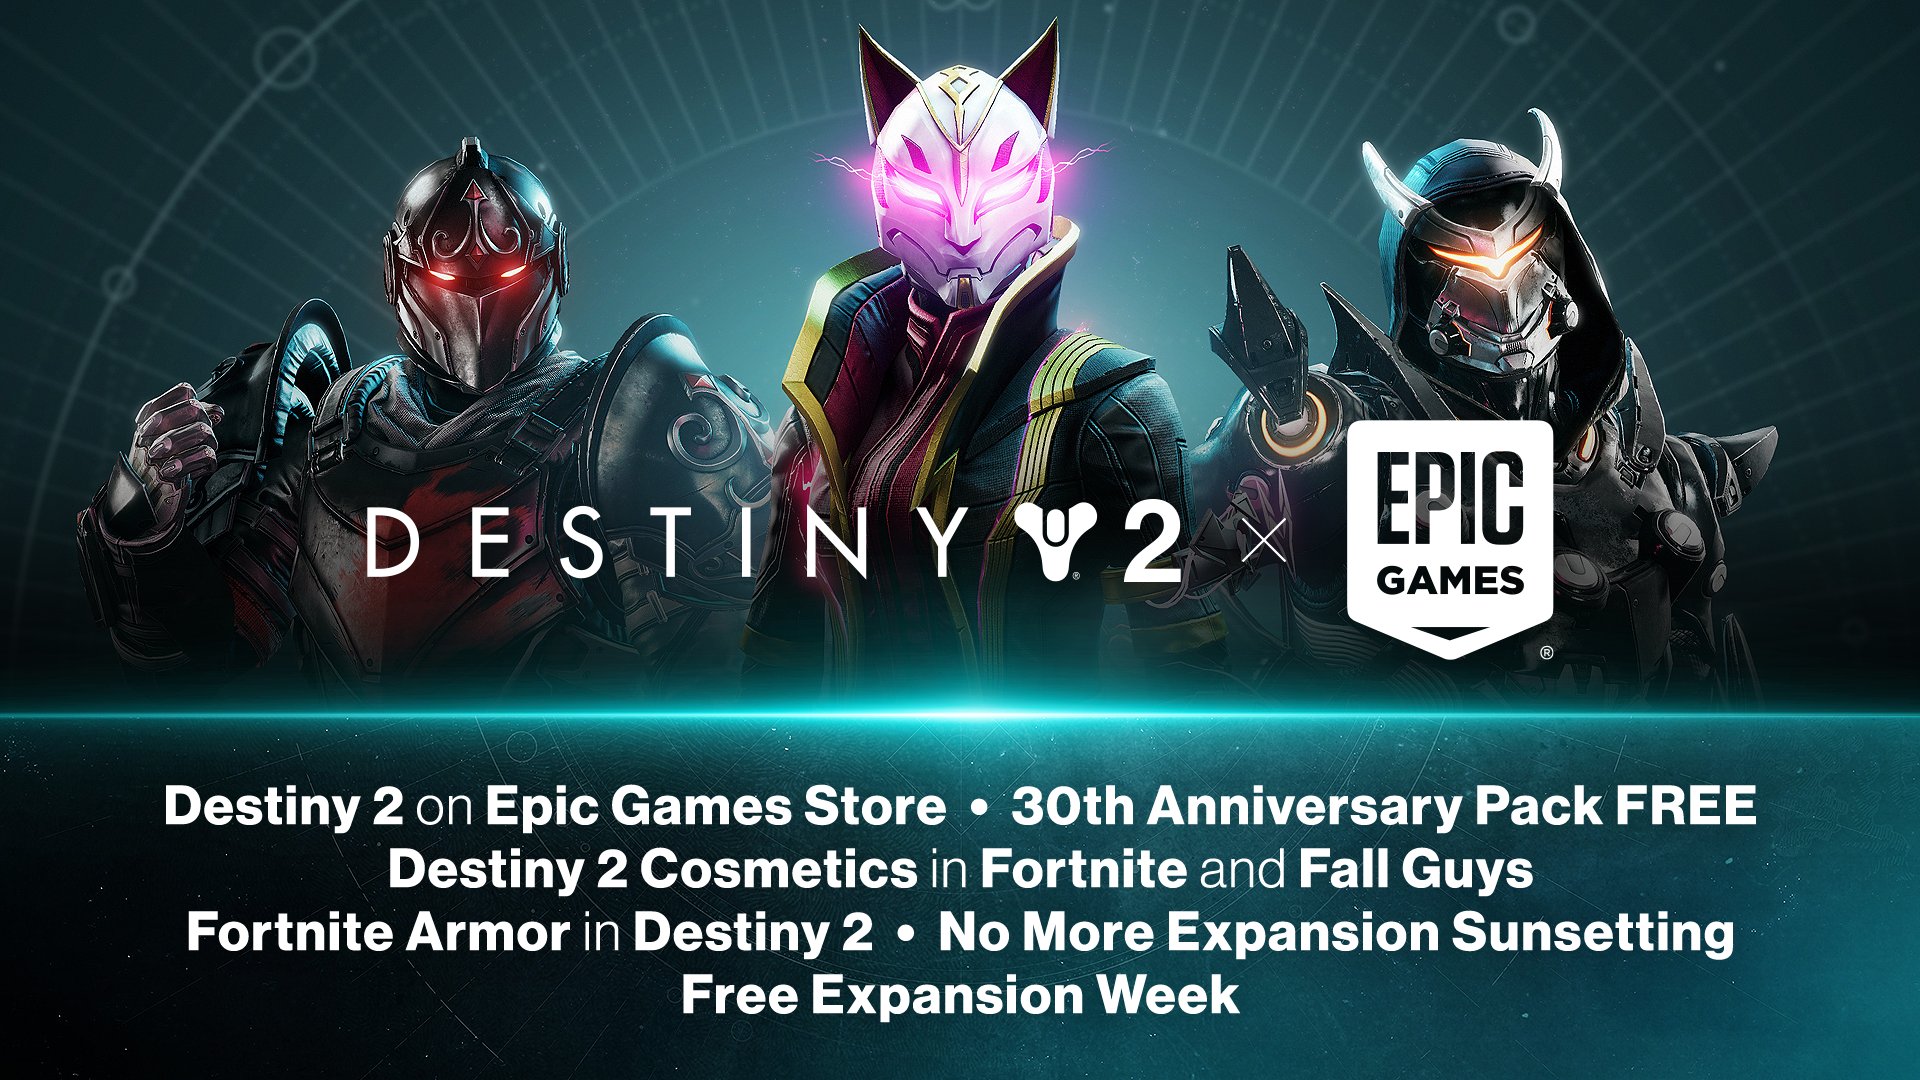 Epic Games Store, Official Site